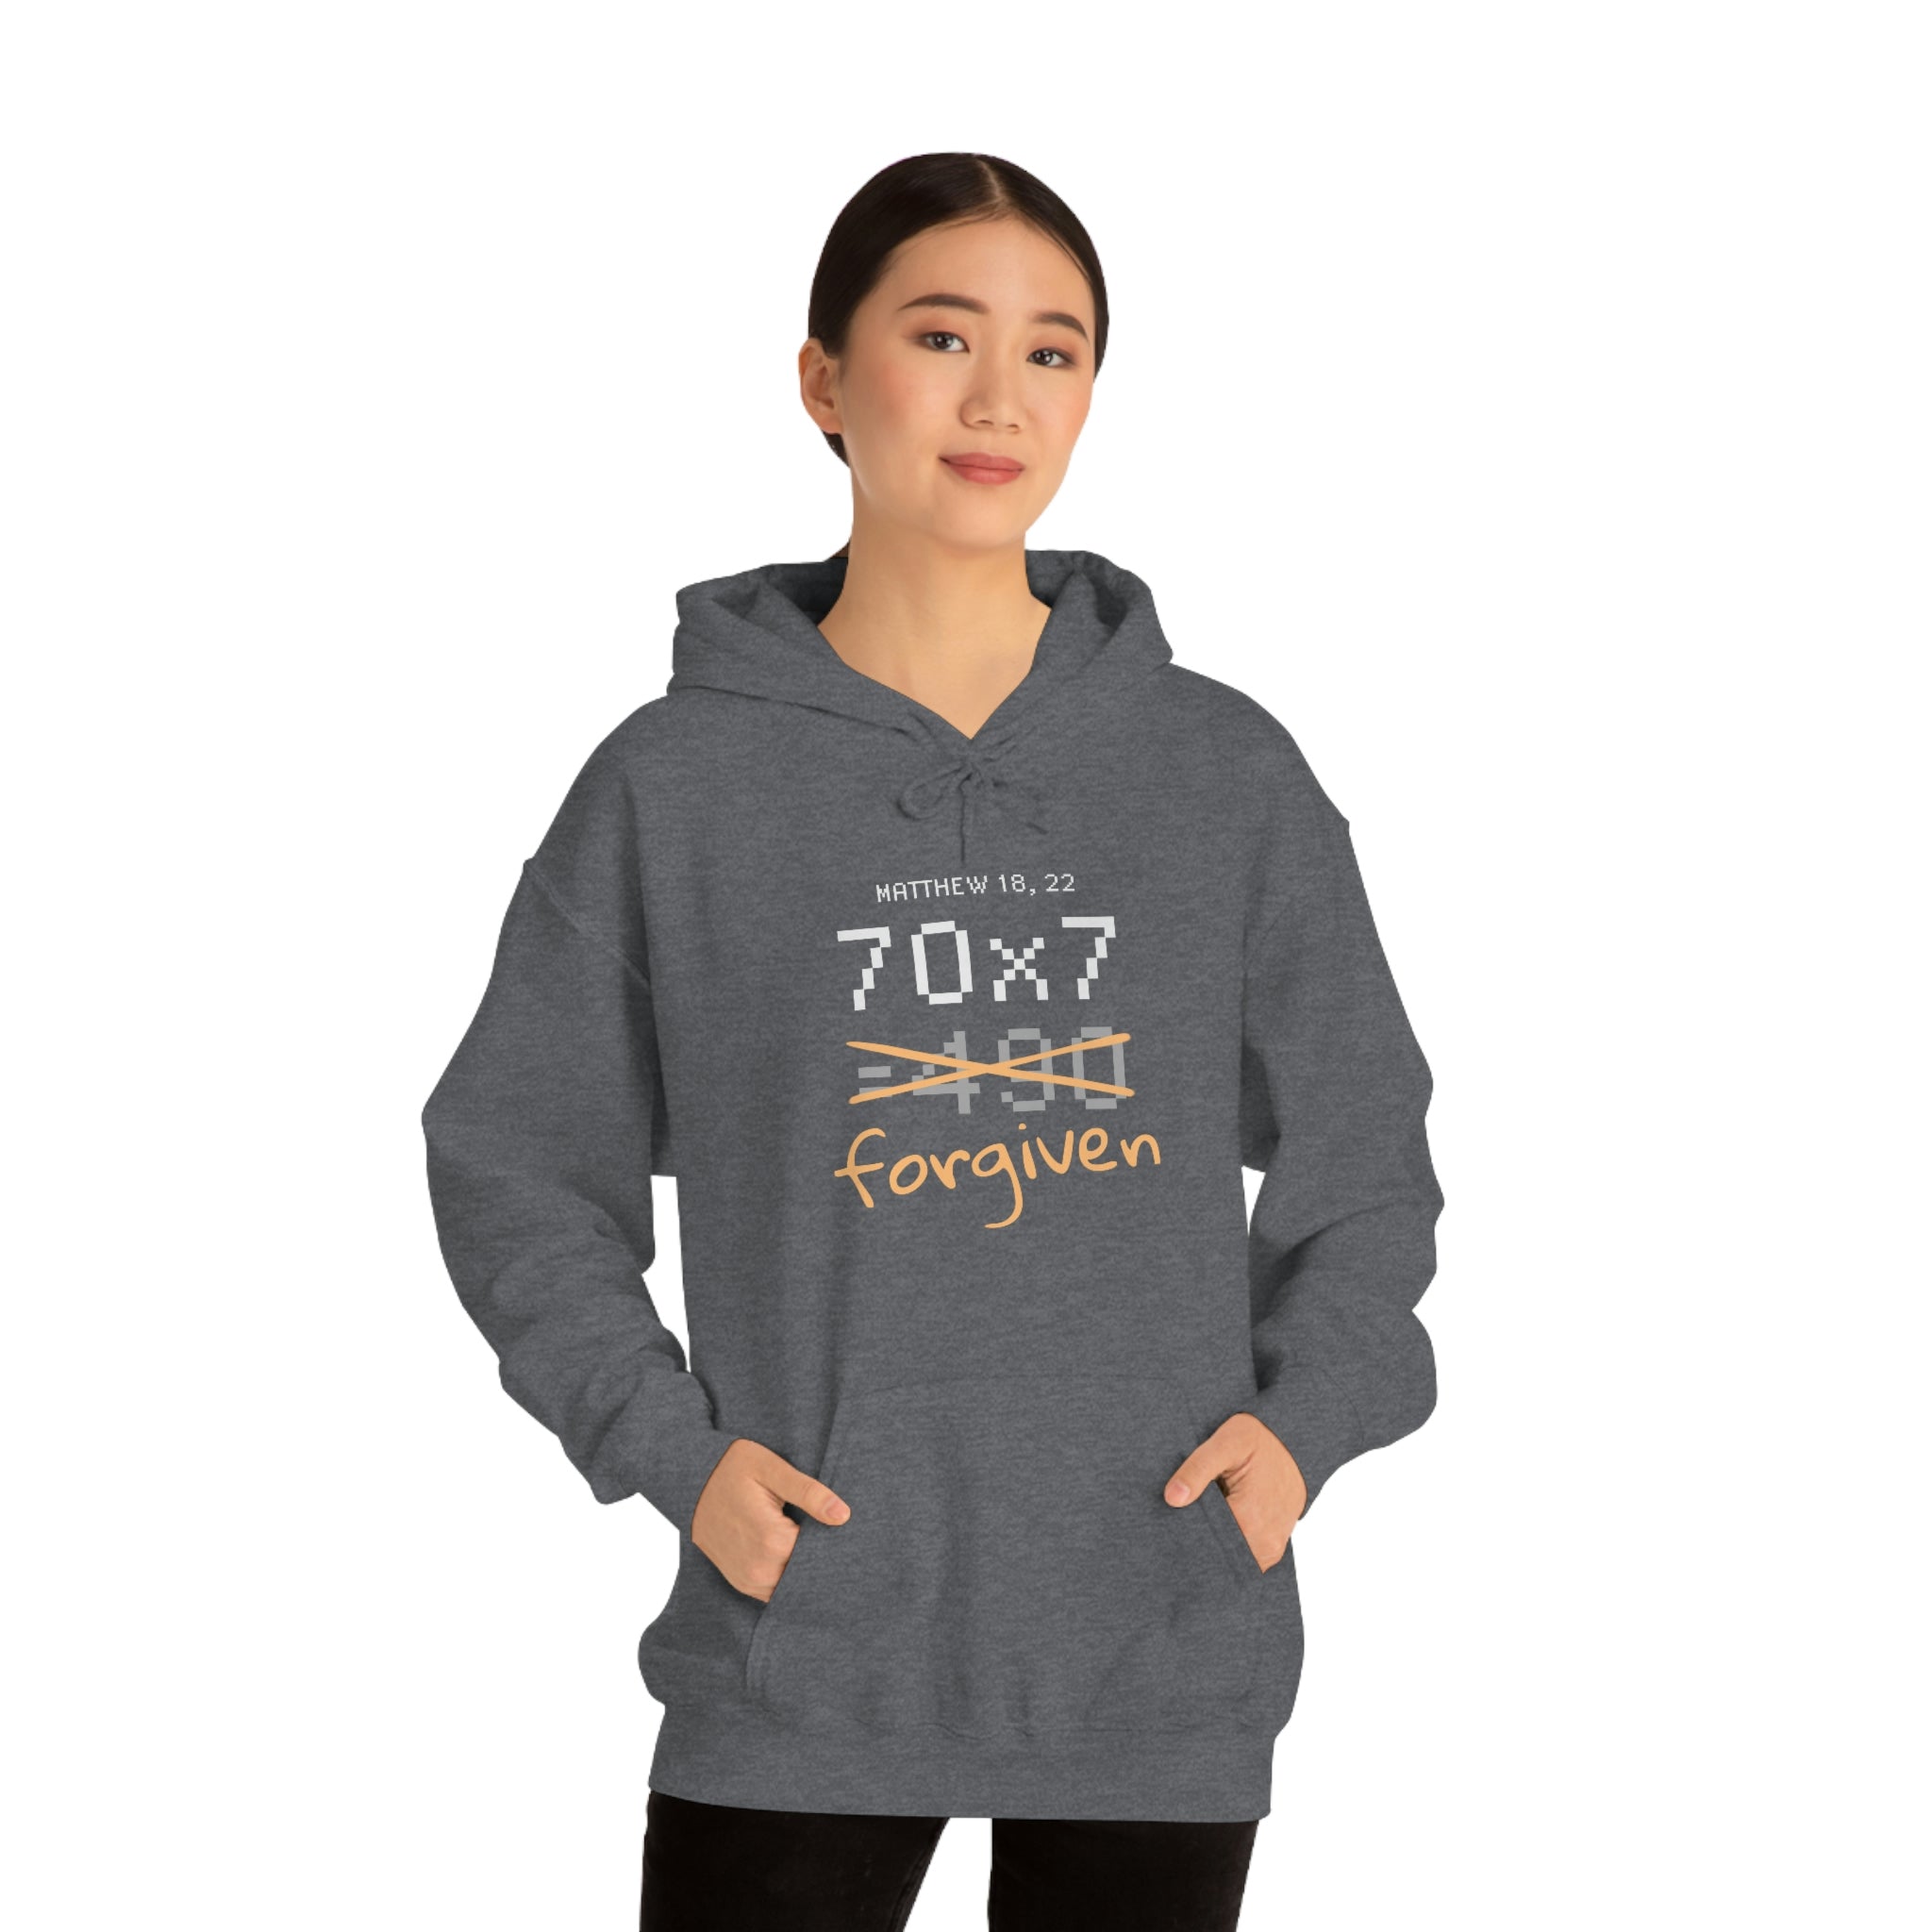 Forgiven Unisex Hoodie